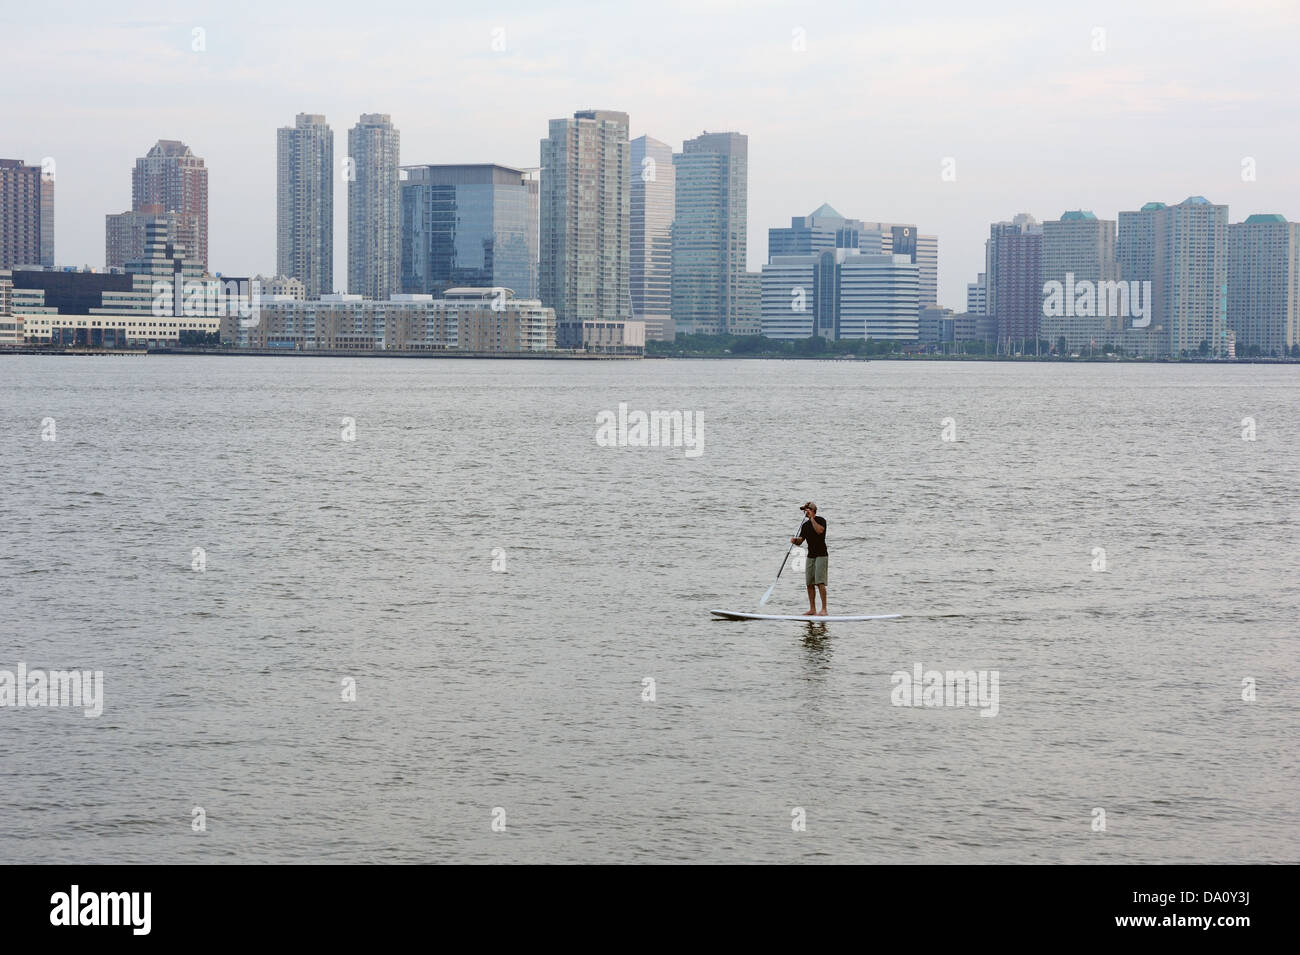 A man paddling on the Hudson River in New York harbor. Jersey City is in the background. Stock Photo